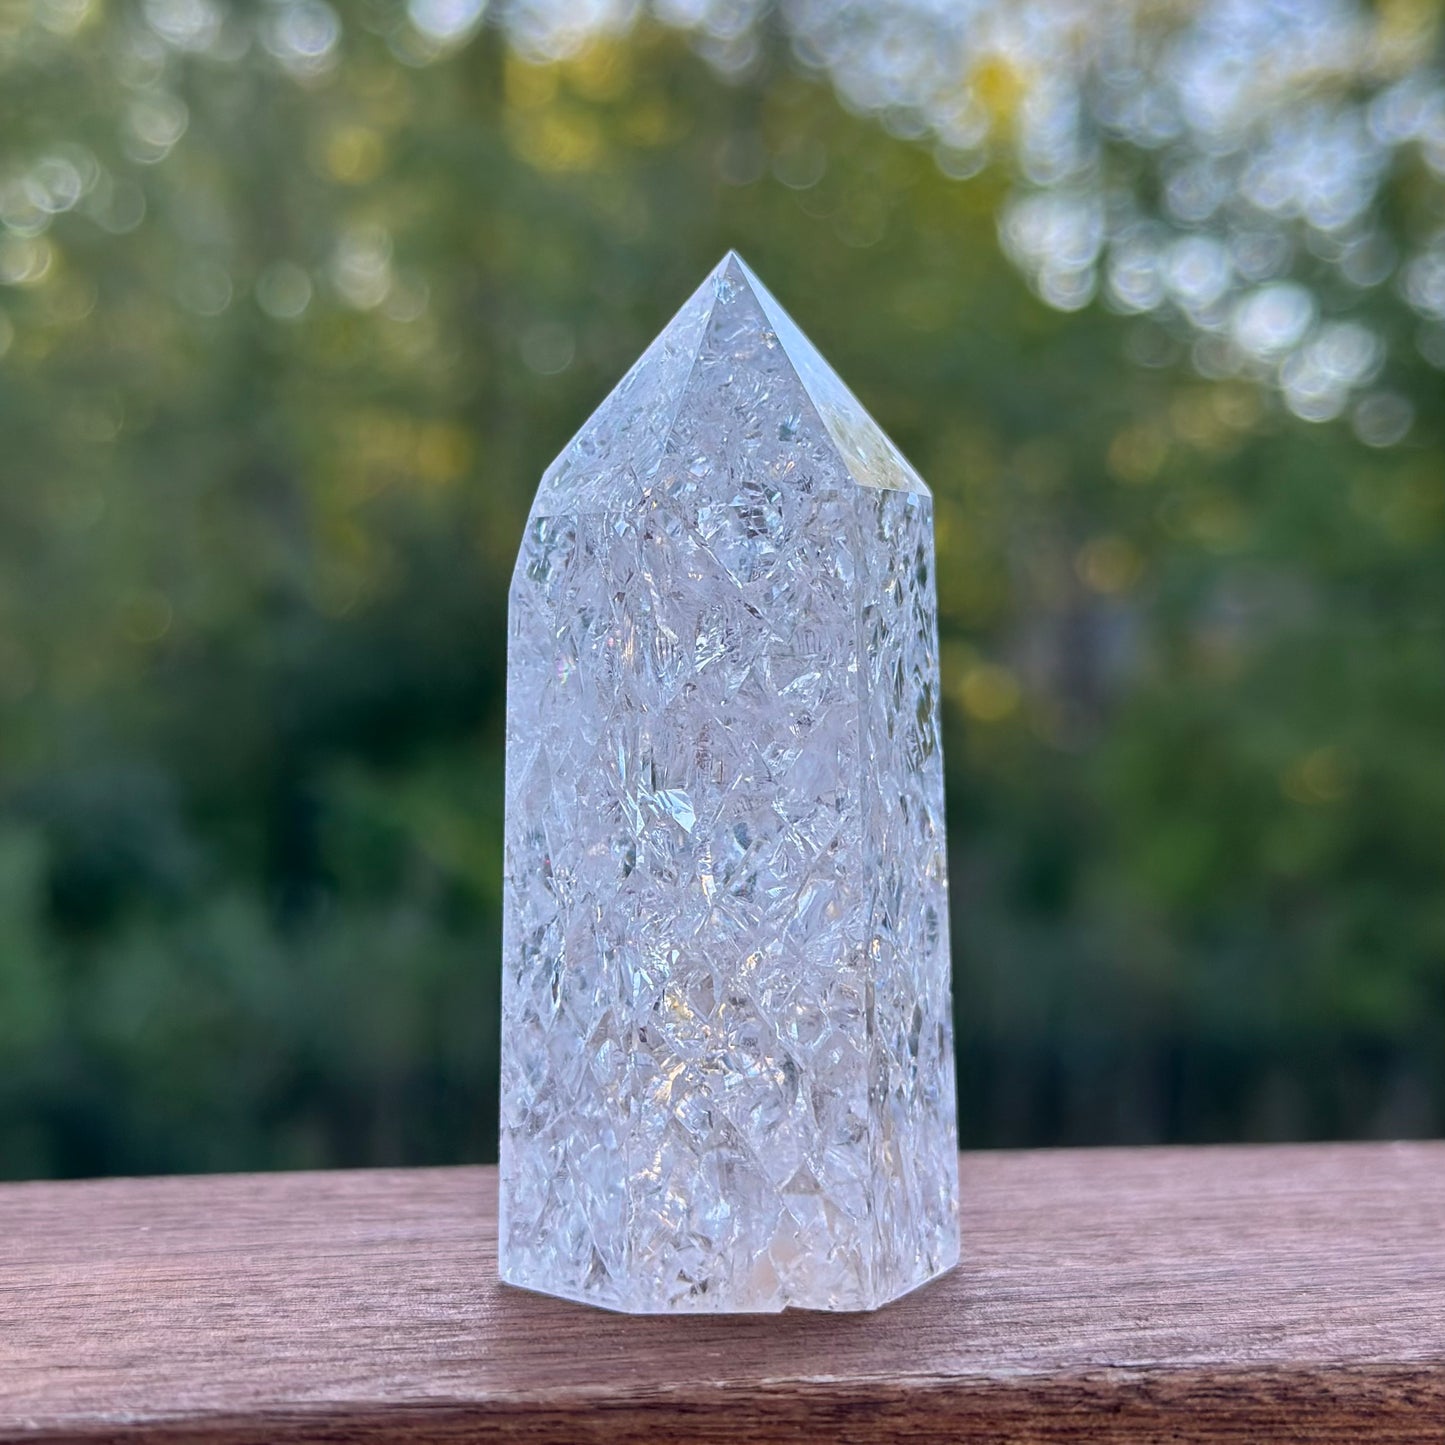 Fire and Ice Crystal Quartz Cracked Polished Tower